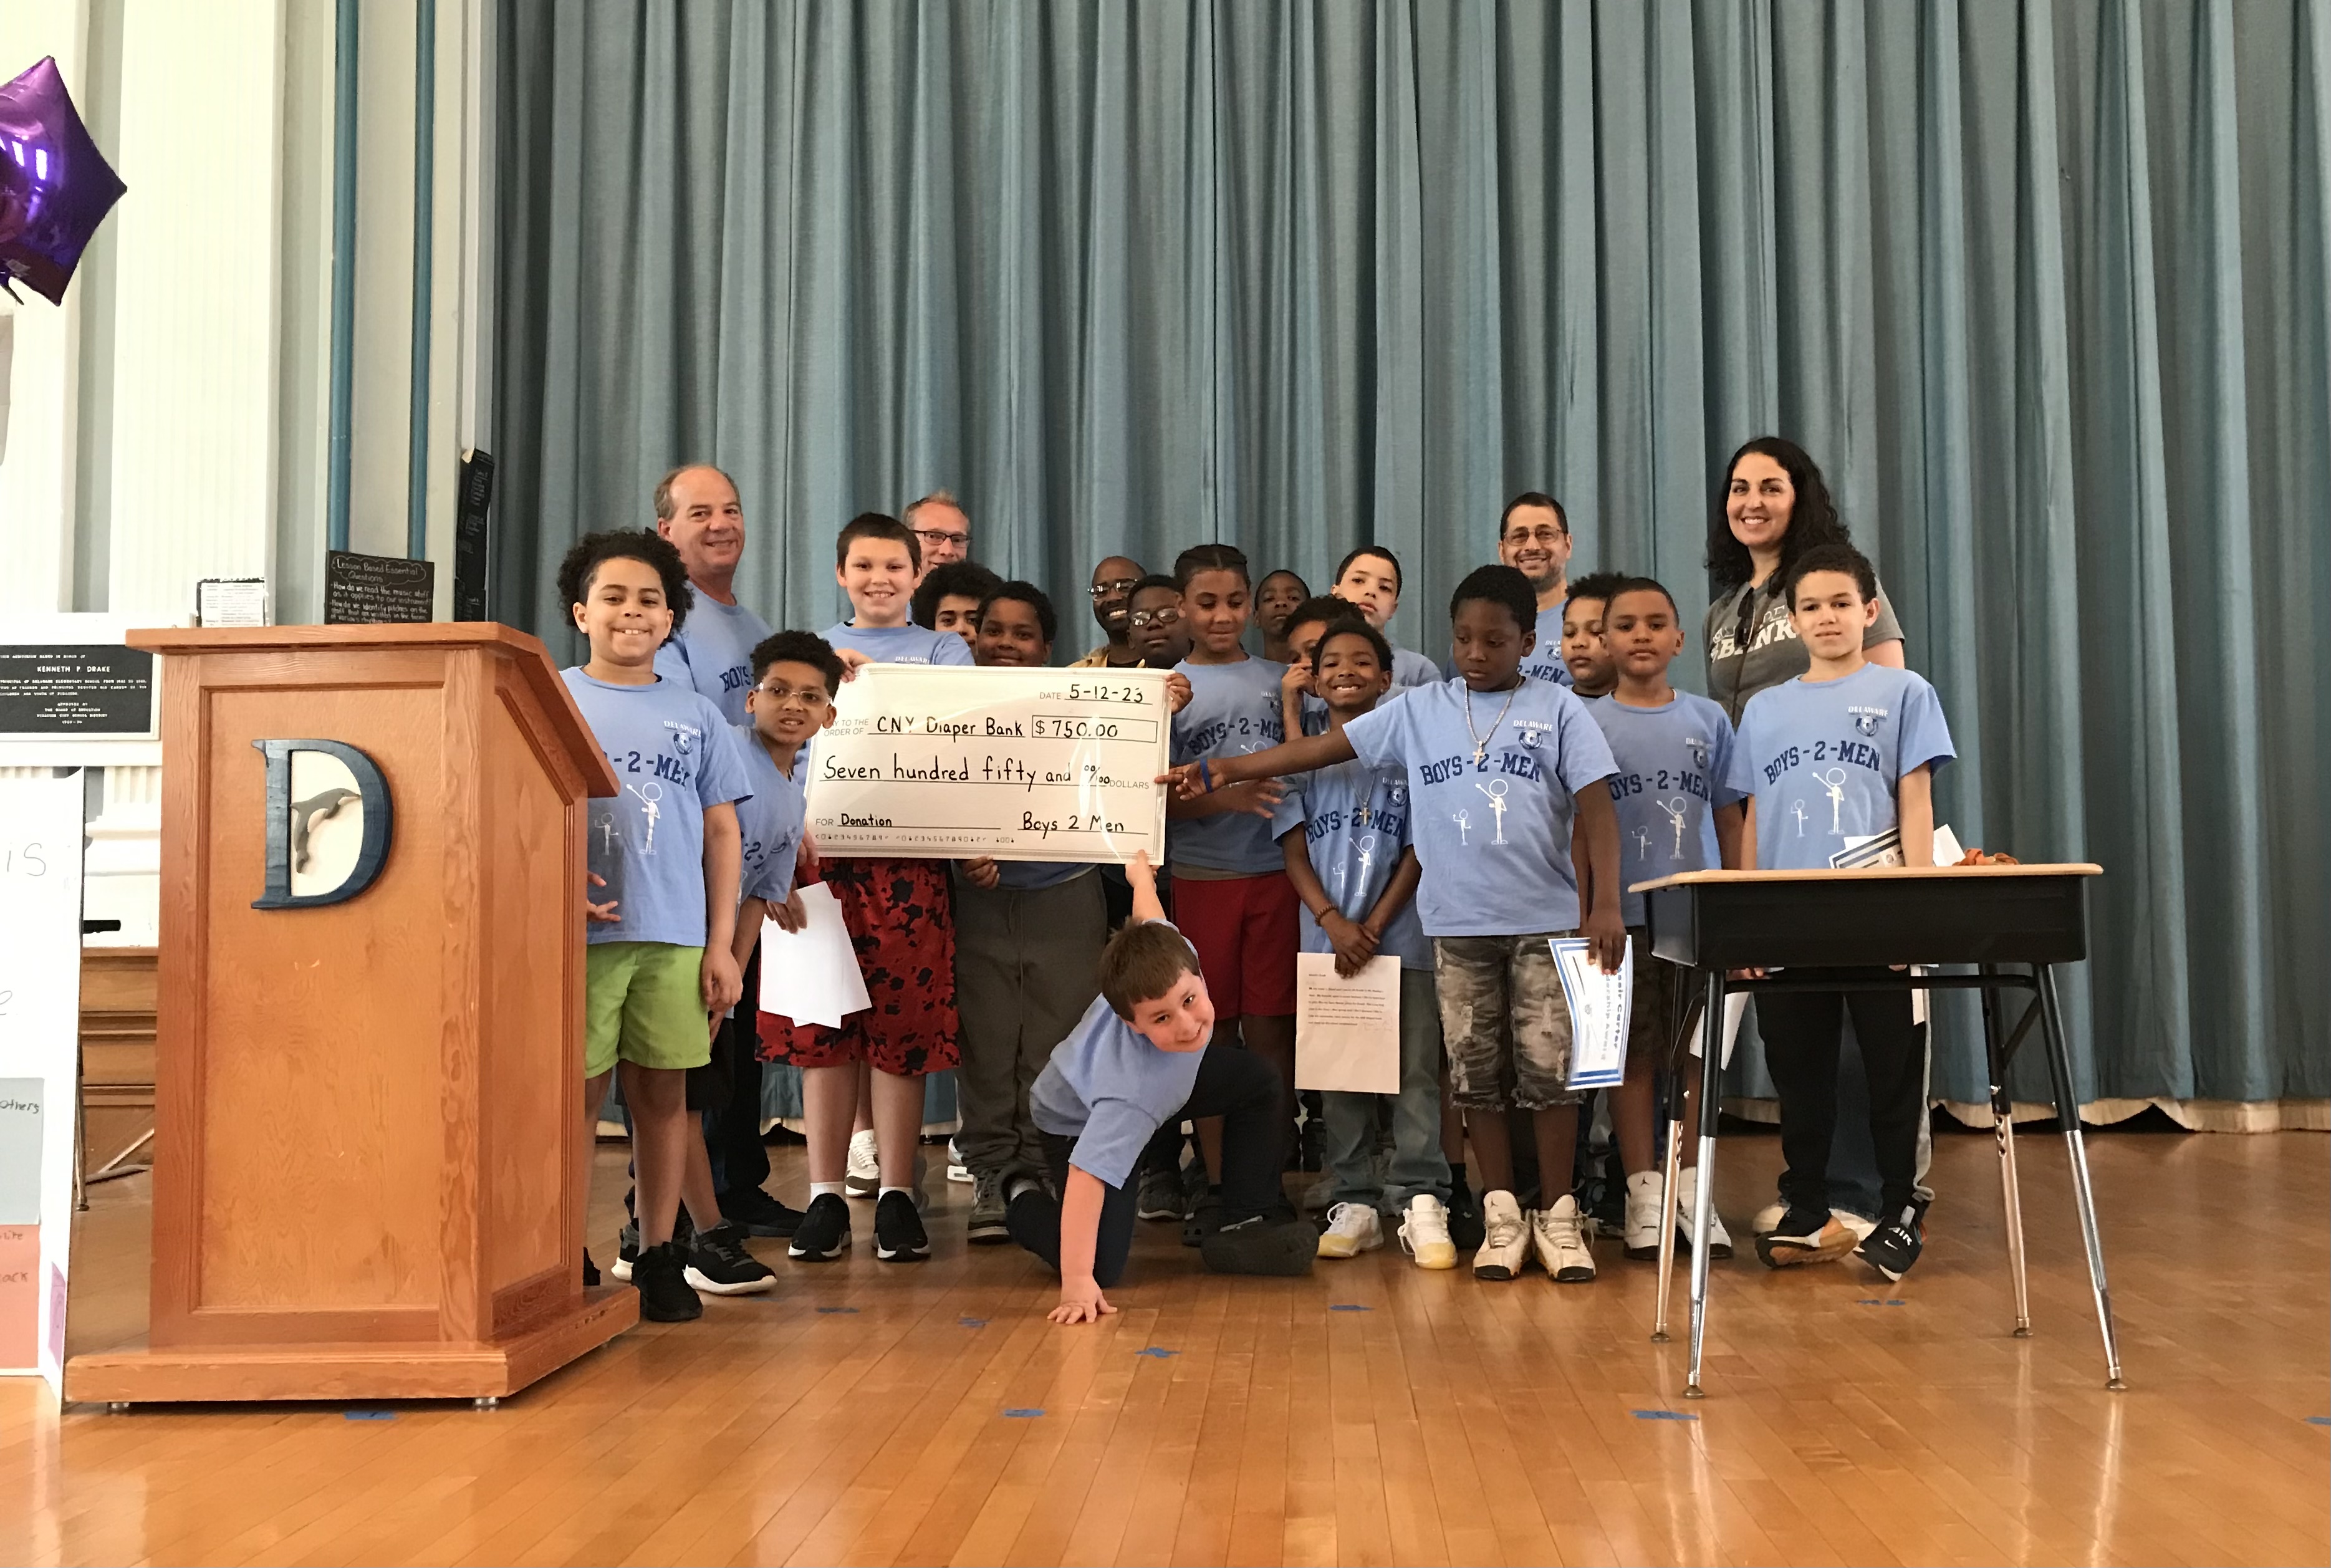 This is a photo of a group of Delaware Primary School students standing on their school stage holding a large check and smiling for the camera.